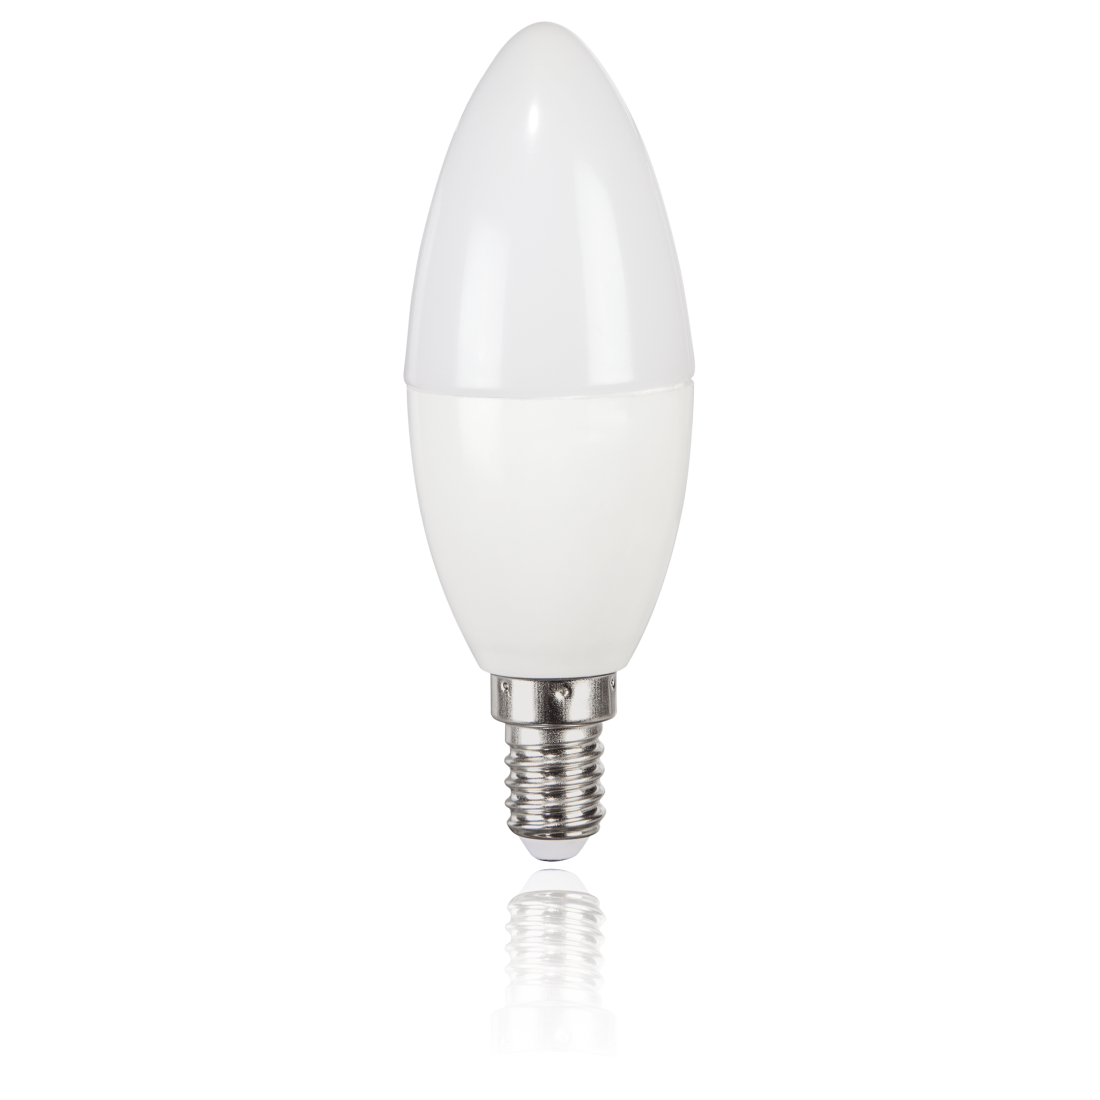 abx2 High-Res Image 2 - Xavax, LED Bulb, E14, 806 lm Replaces 60W, Candle Bulb, warm white